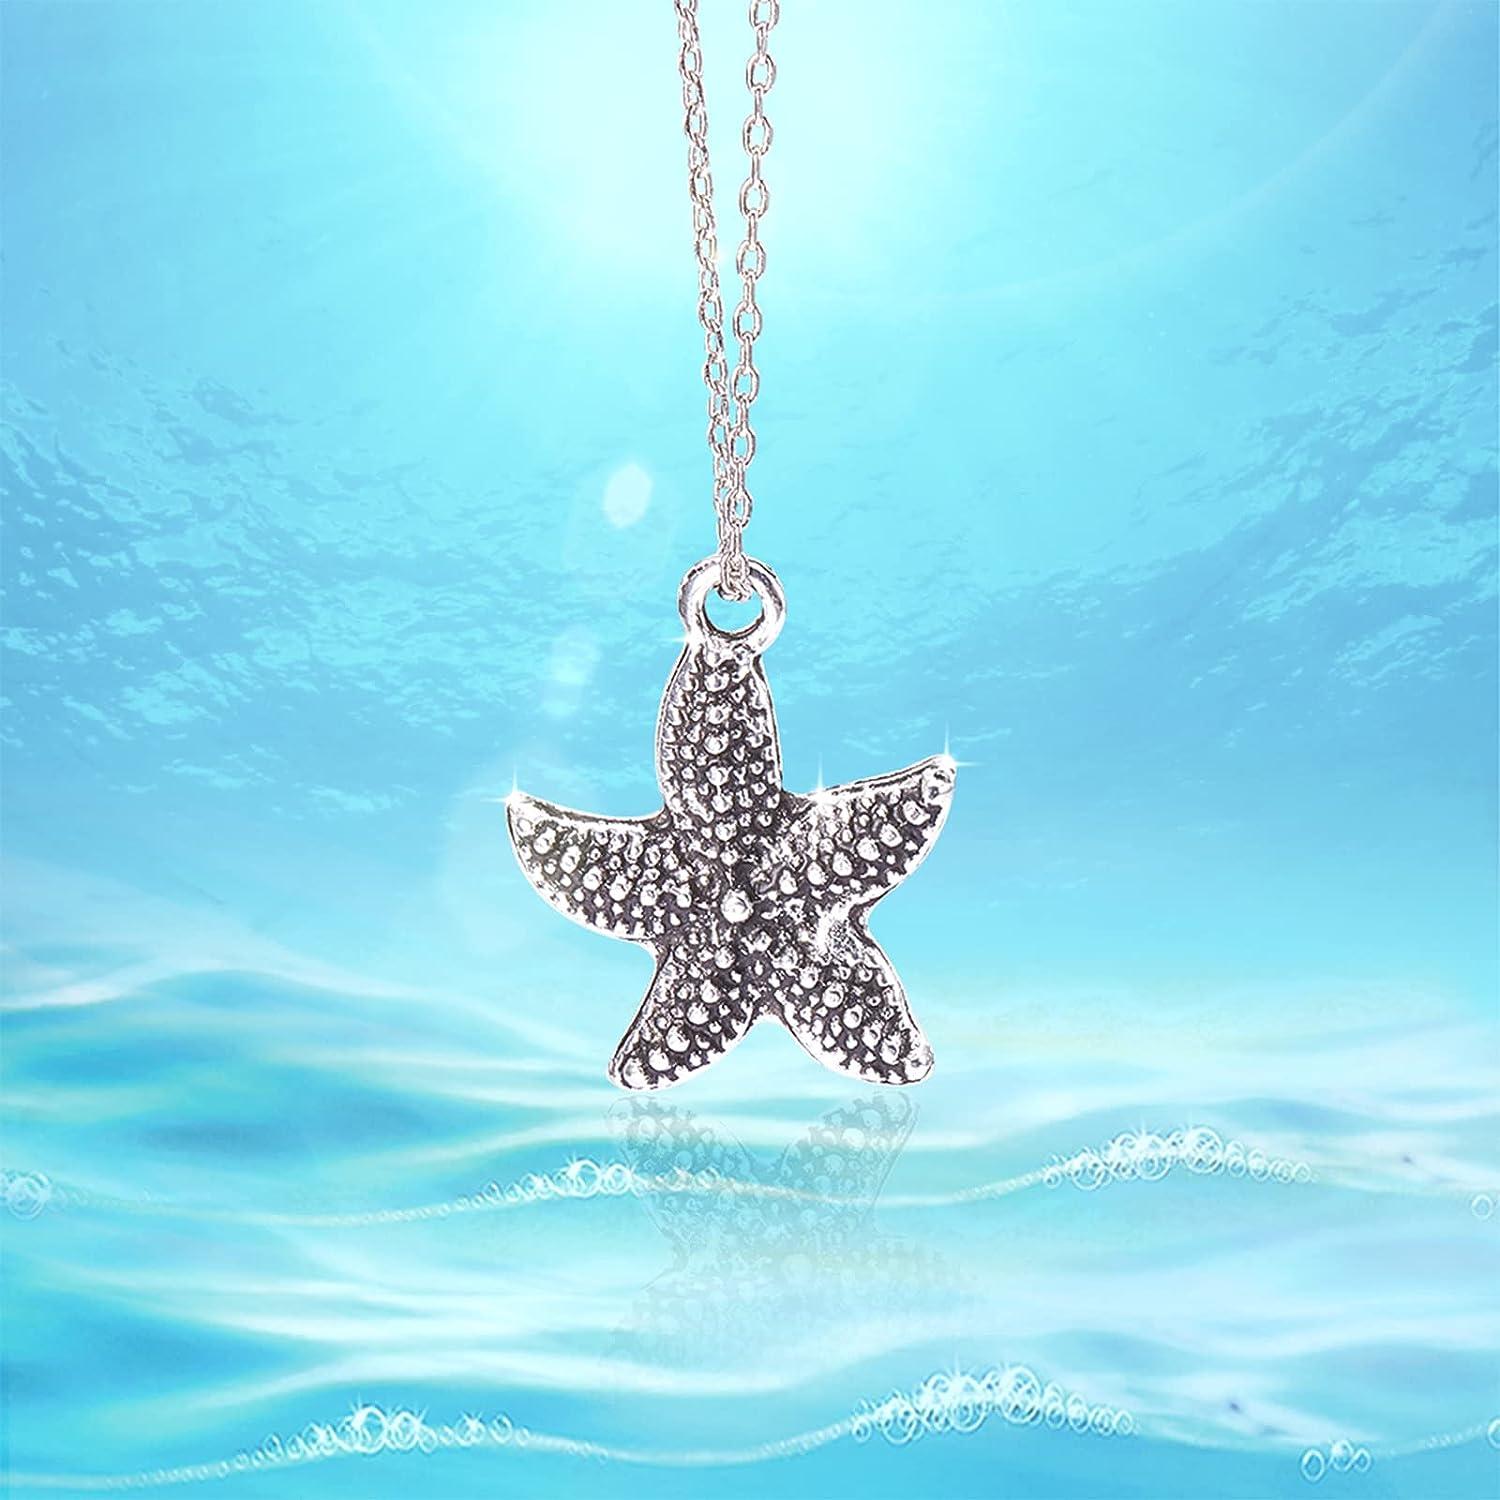 24pcs 6 Styles Shell/Starfish/Shrimp/Dolphin Pendants Golden Oceans Life Charm Stainless Steel Charms for DIY Necklace Jewelry Making 1-1.2mm Hole